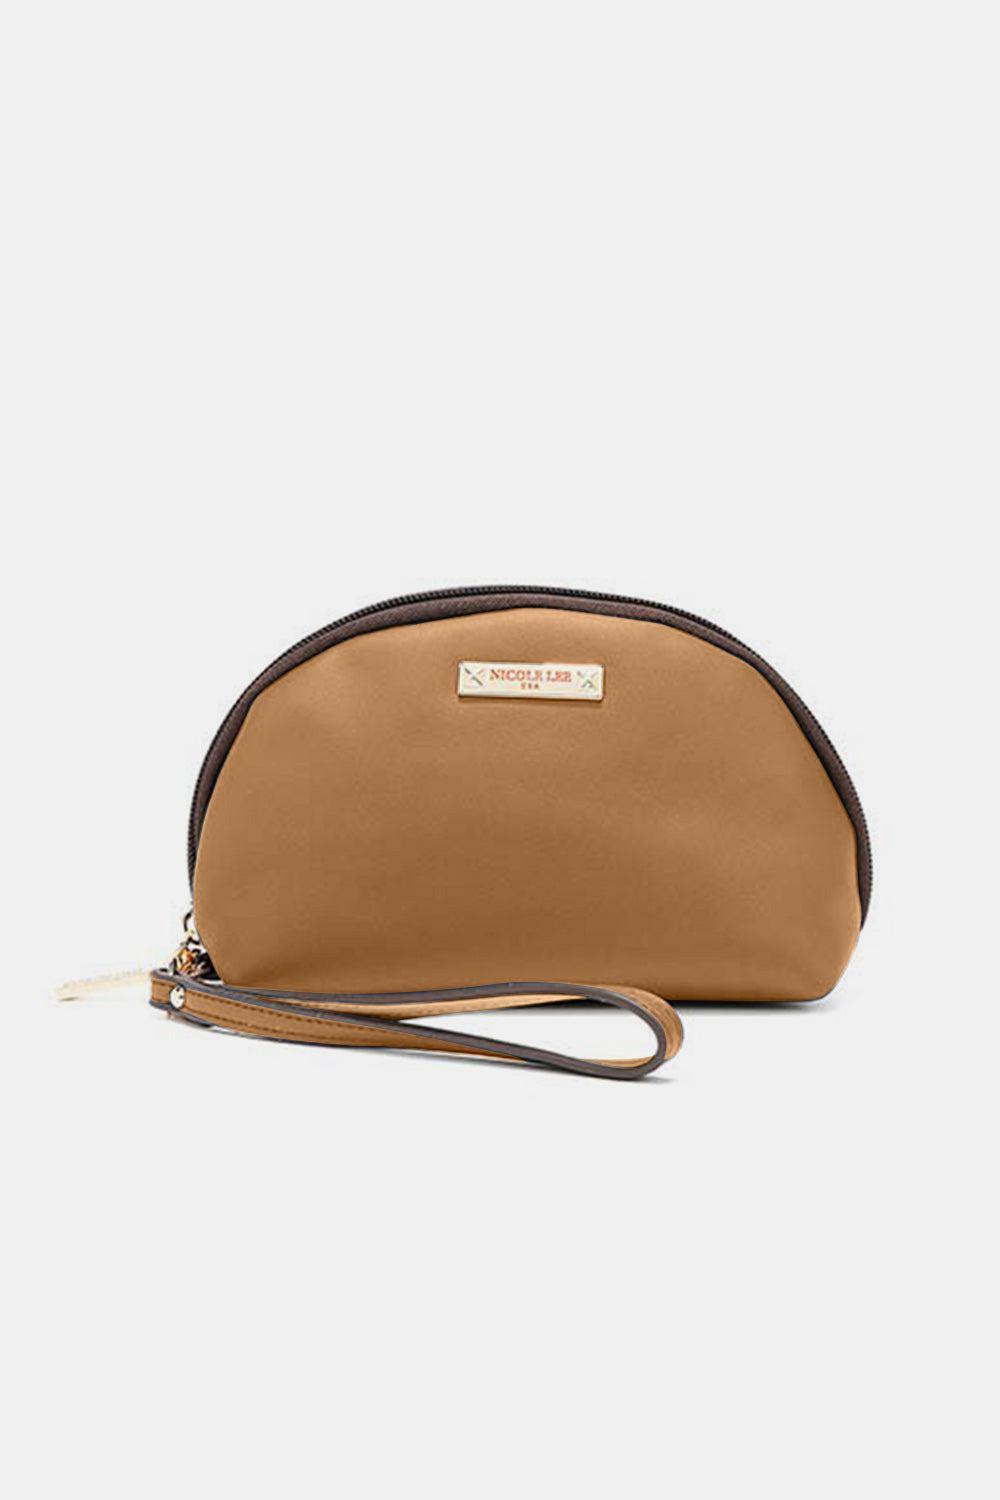 a small tan purse with a brown strap